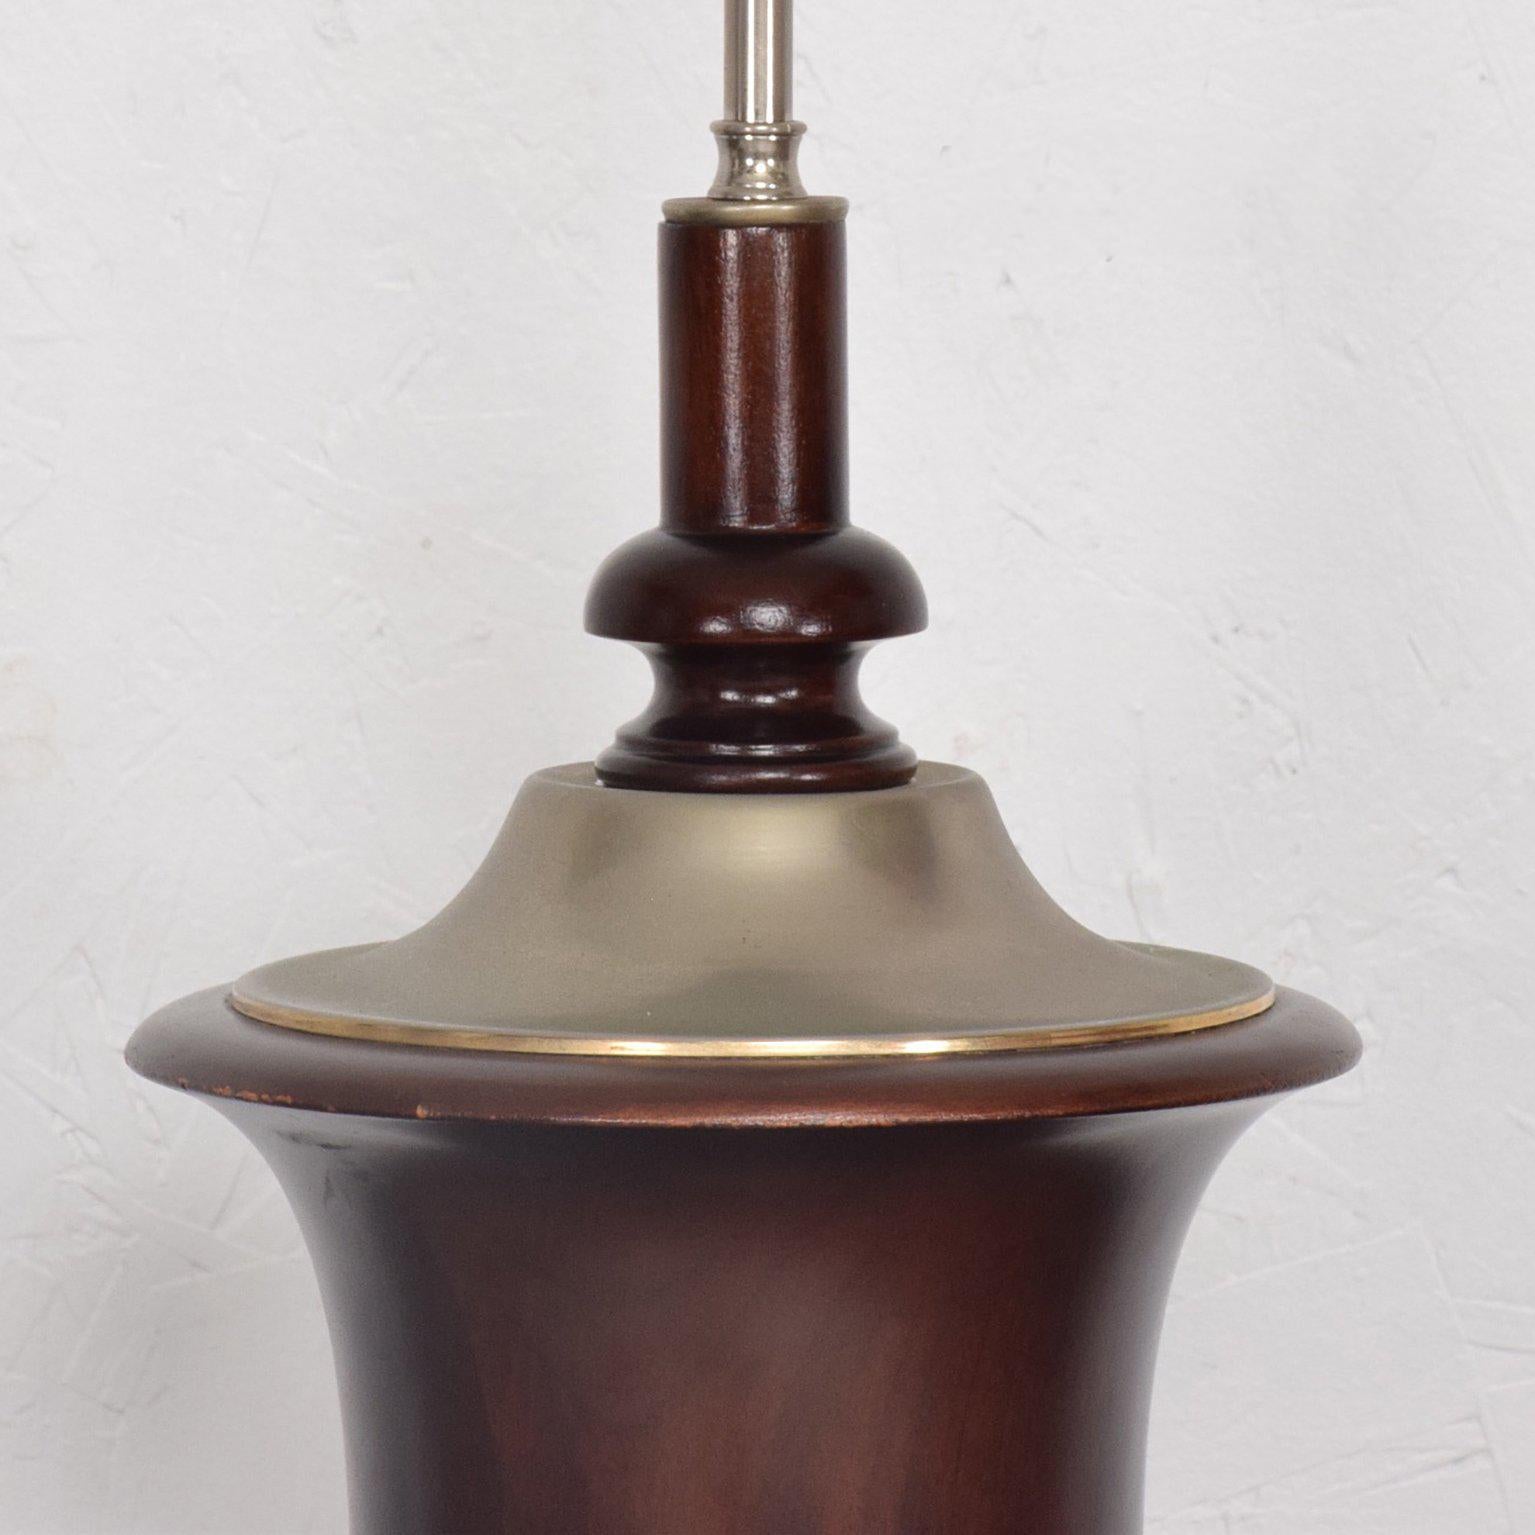 Pair of Neoclassical Table Lamps in Mahogany & Nickel-Plated, Mexican Modernist 1